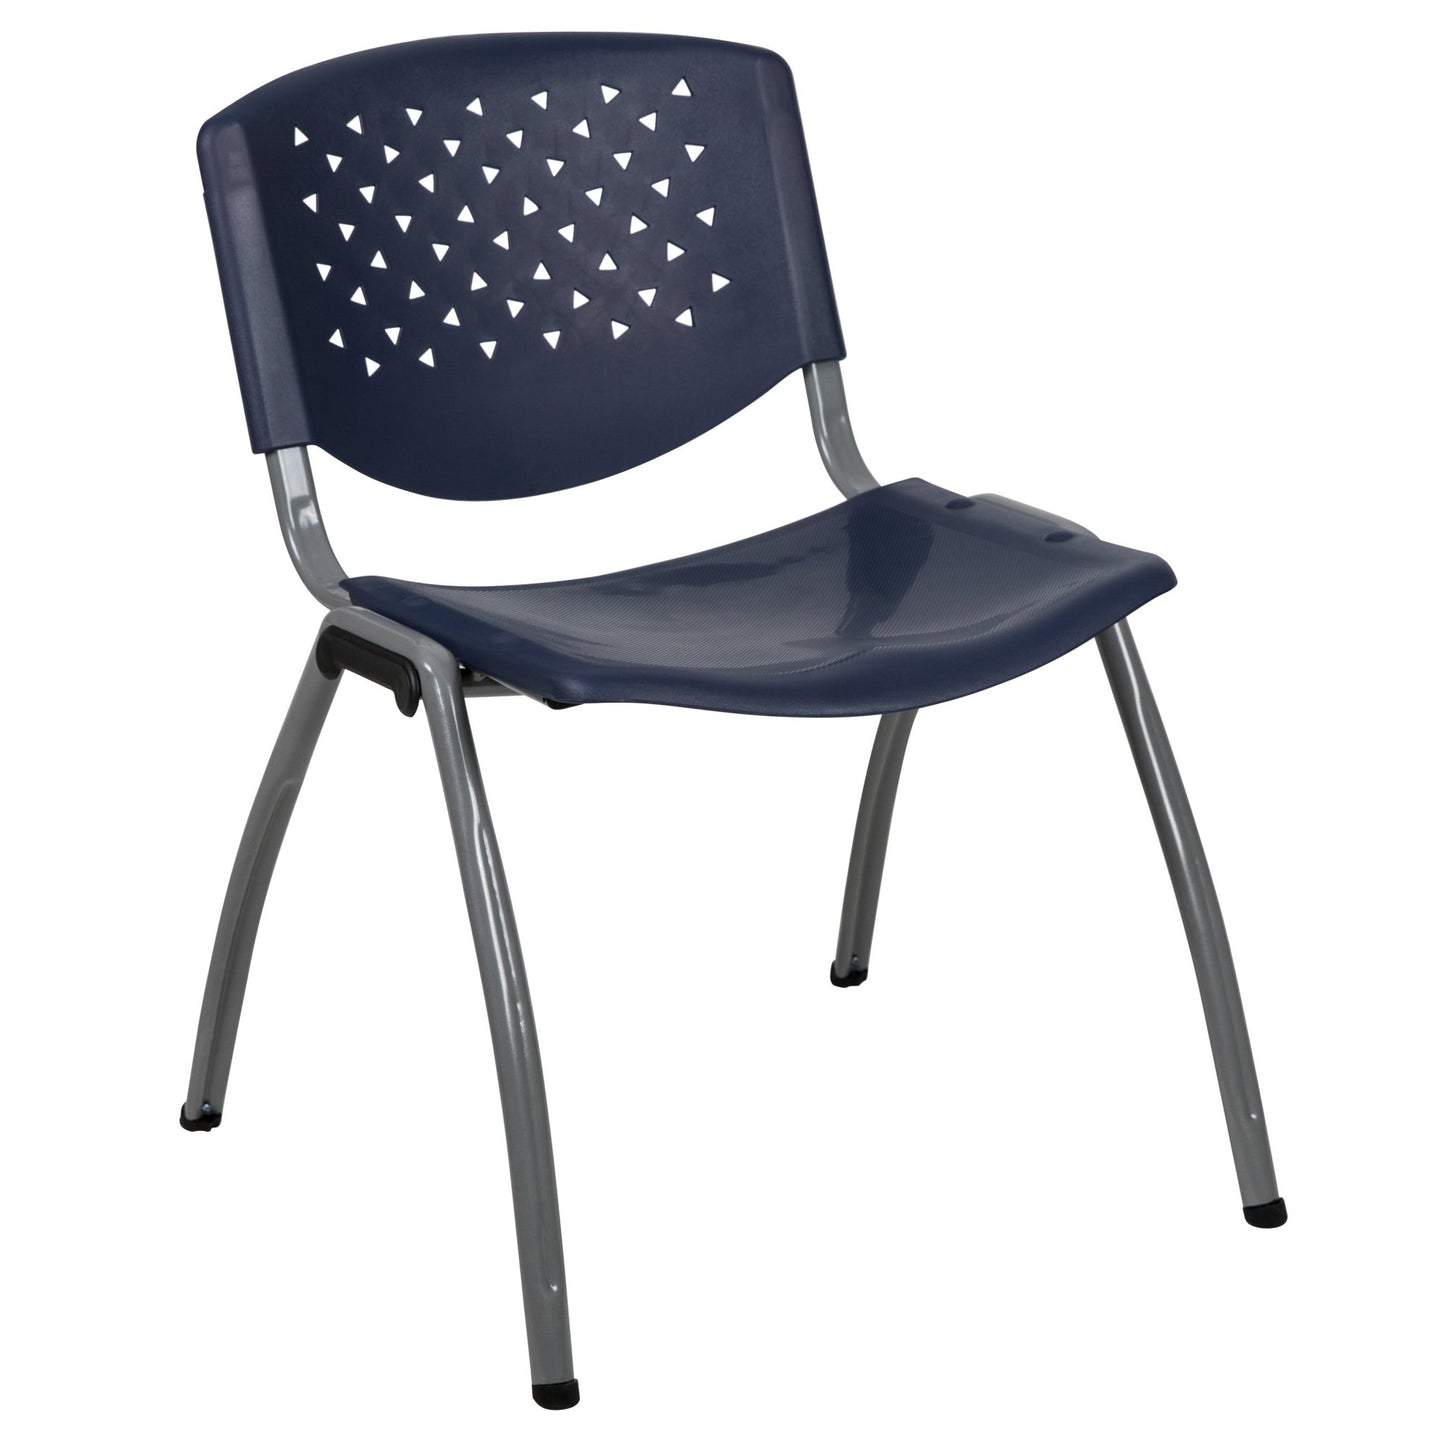 HERCULES Series 880 lb. Capacity Plastic Stack Chair with Titanium Powder Coated Frame - SchoolOutlet